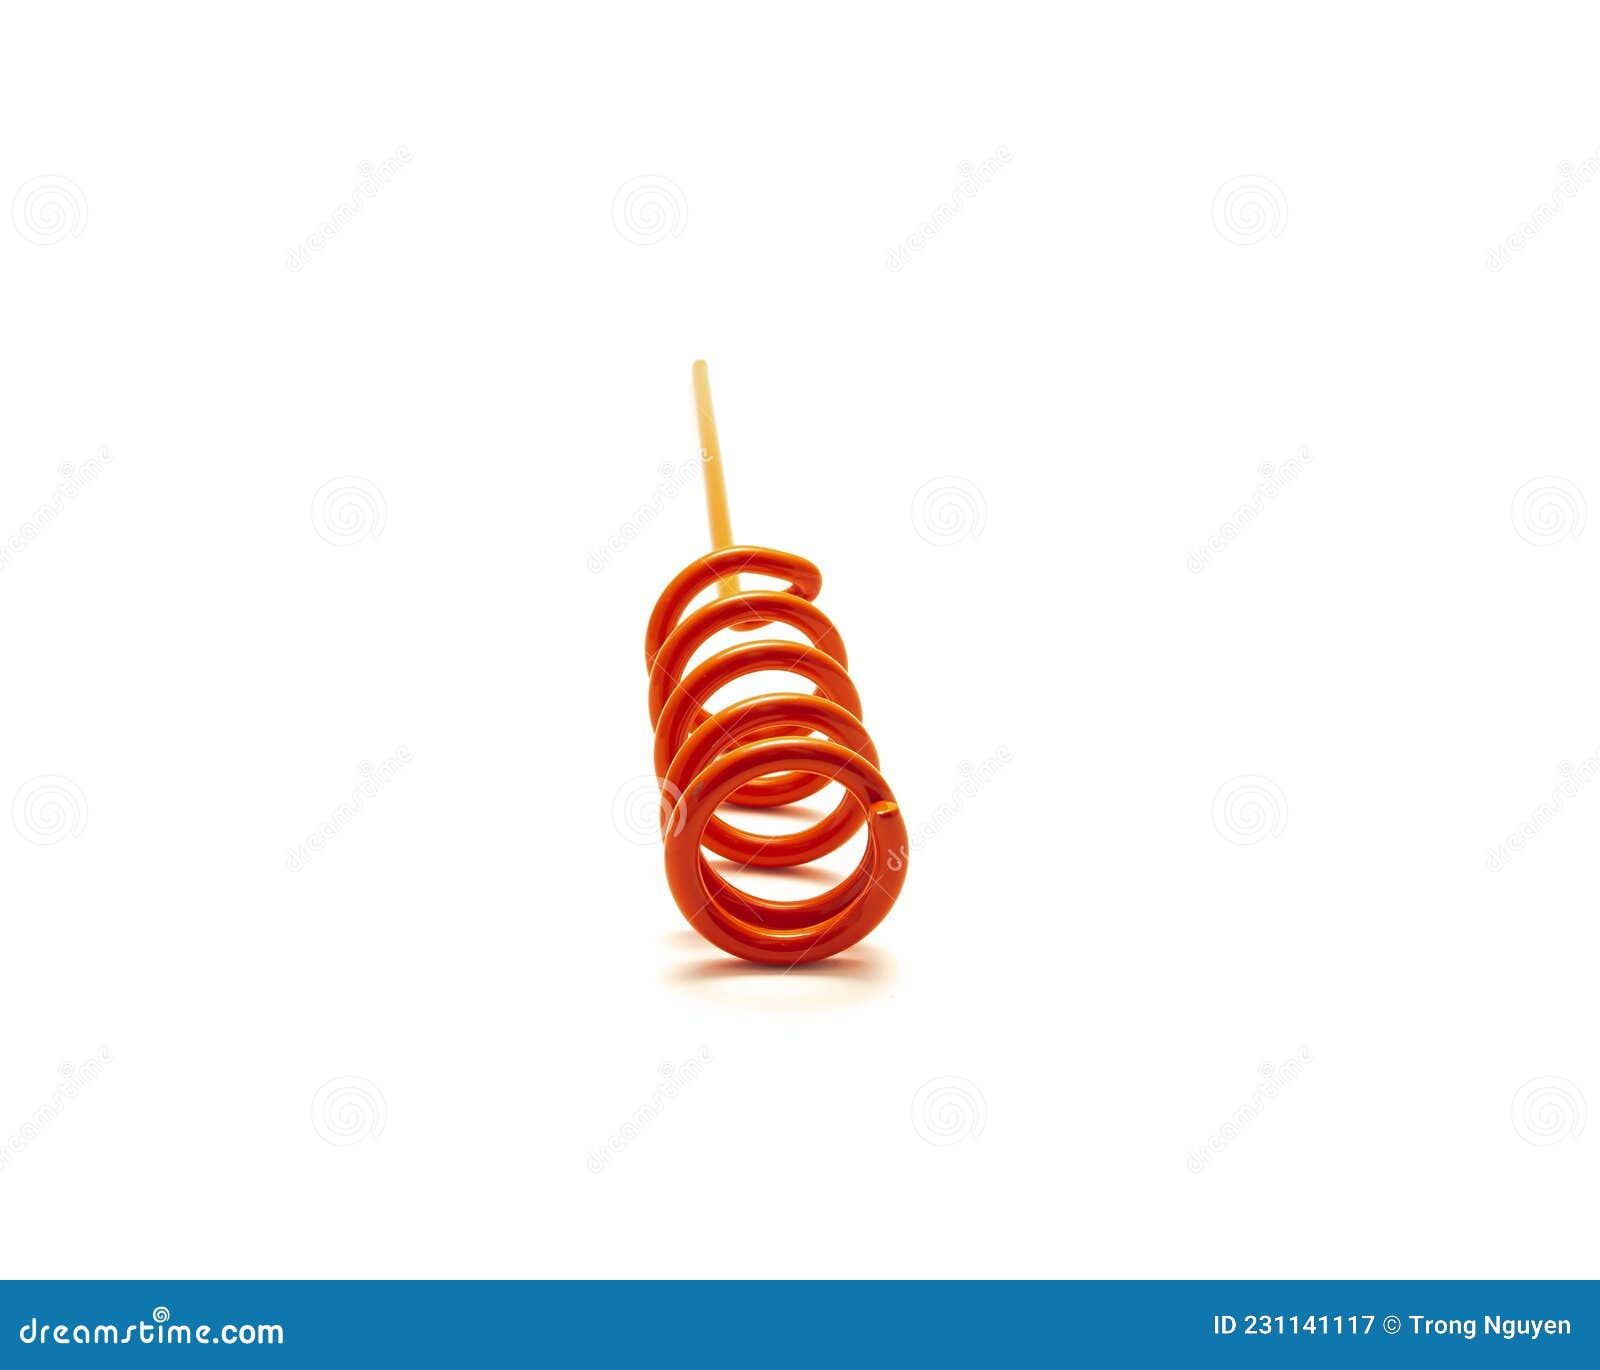 Zoom in Part of Red Powdered Coated Steel Finish Spiral Rod Pole Holder Bank  Fishing Gear Isolated on White Stock Image - Image of coated, angler:  231141117